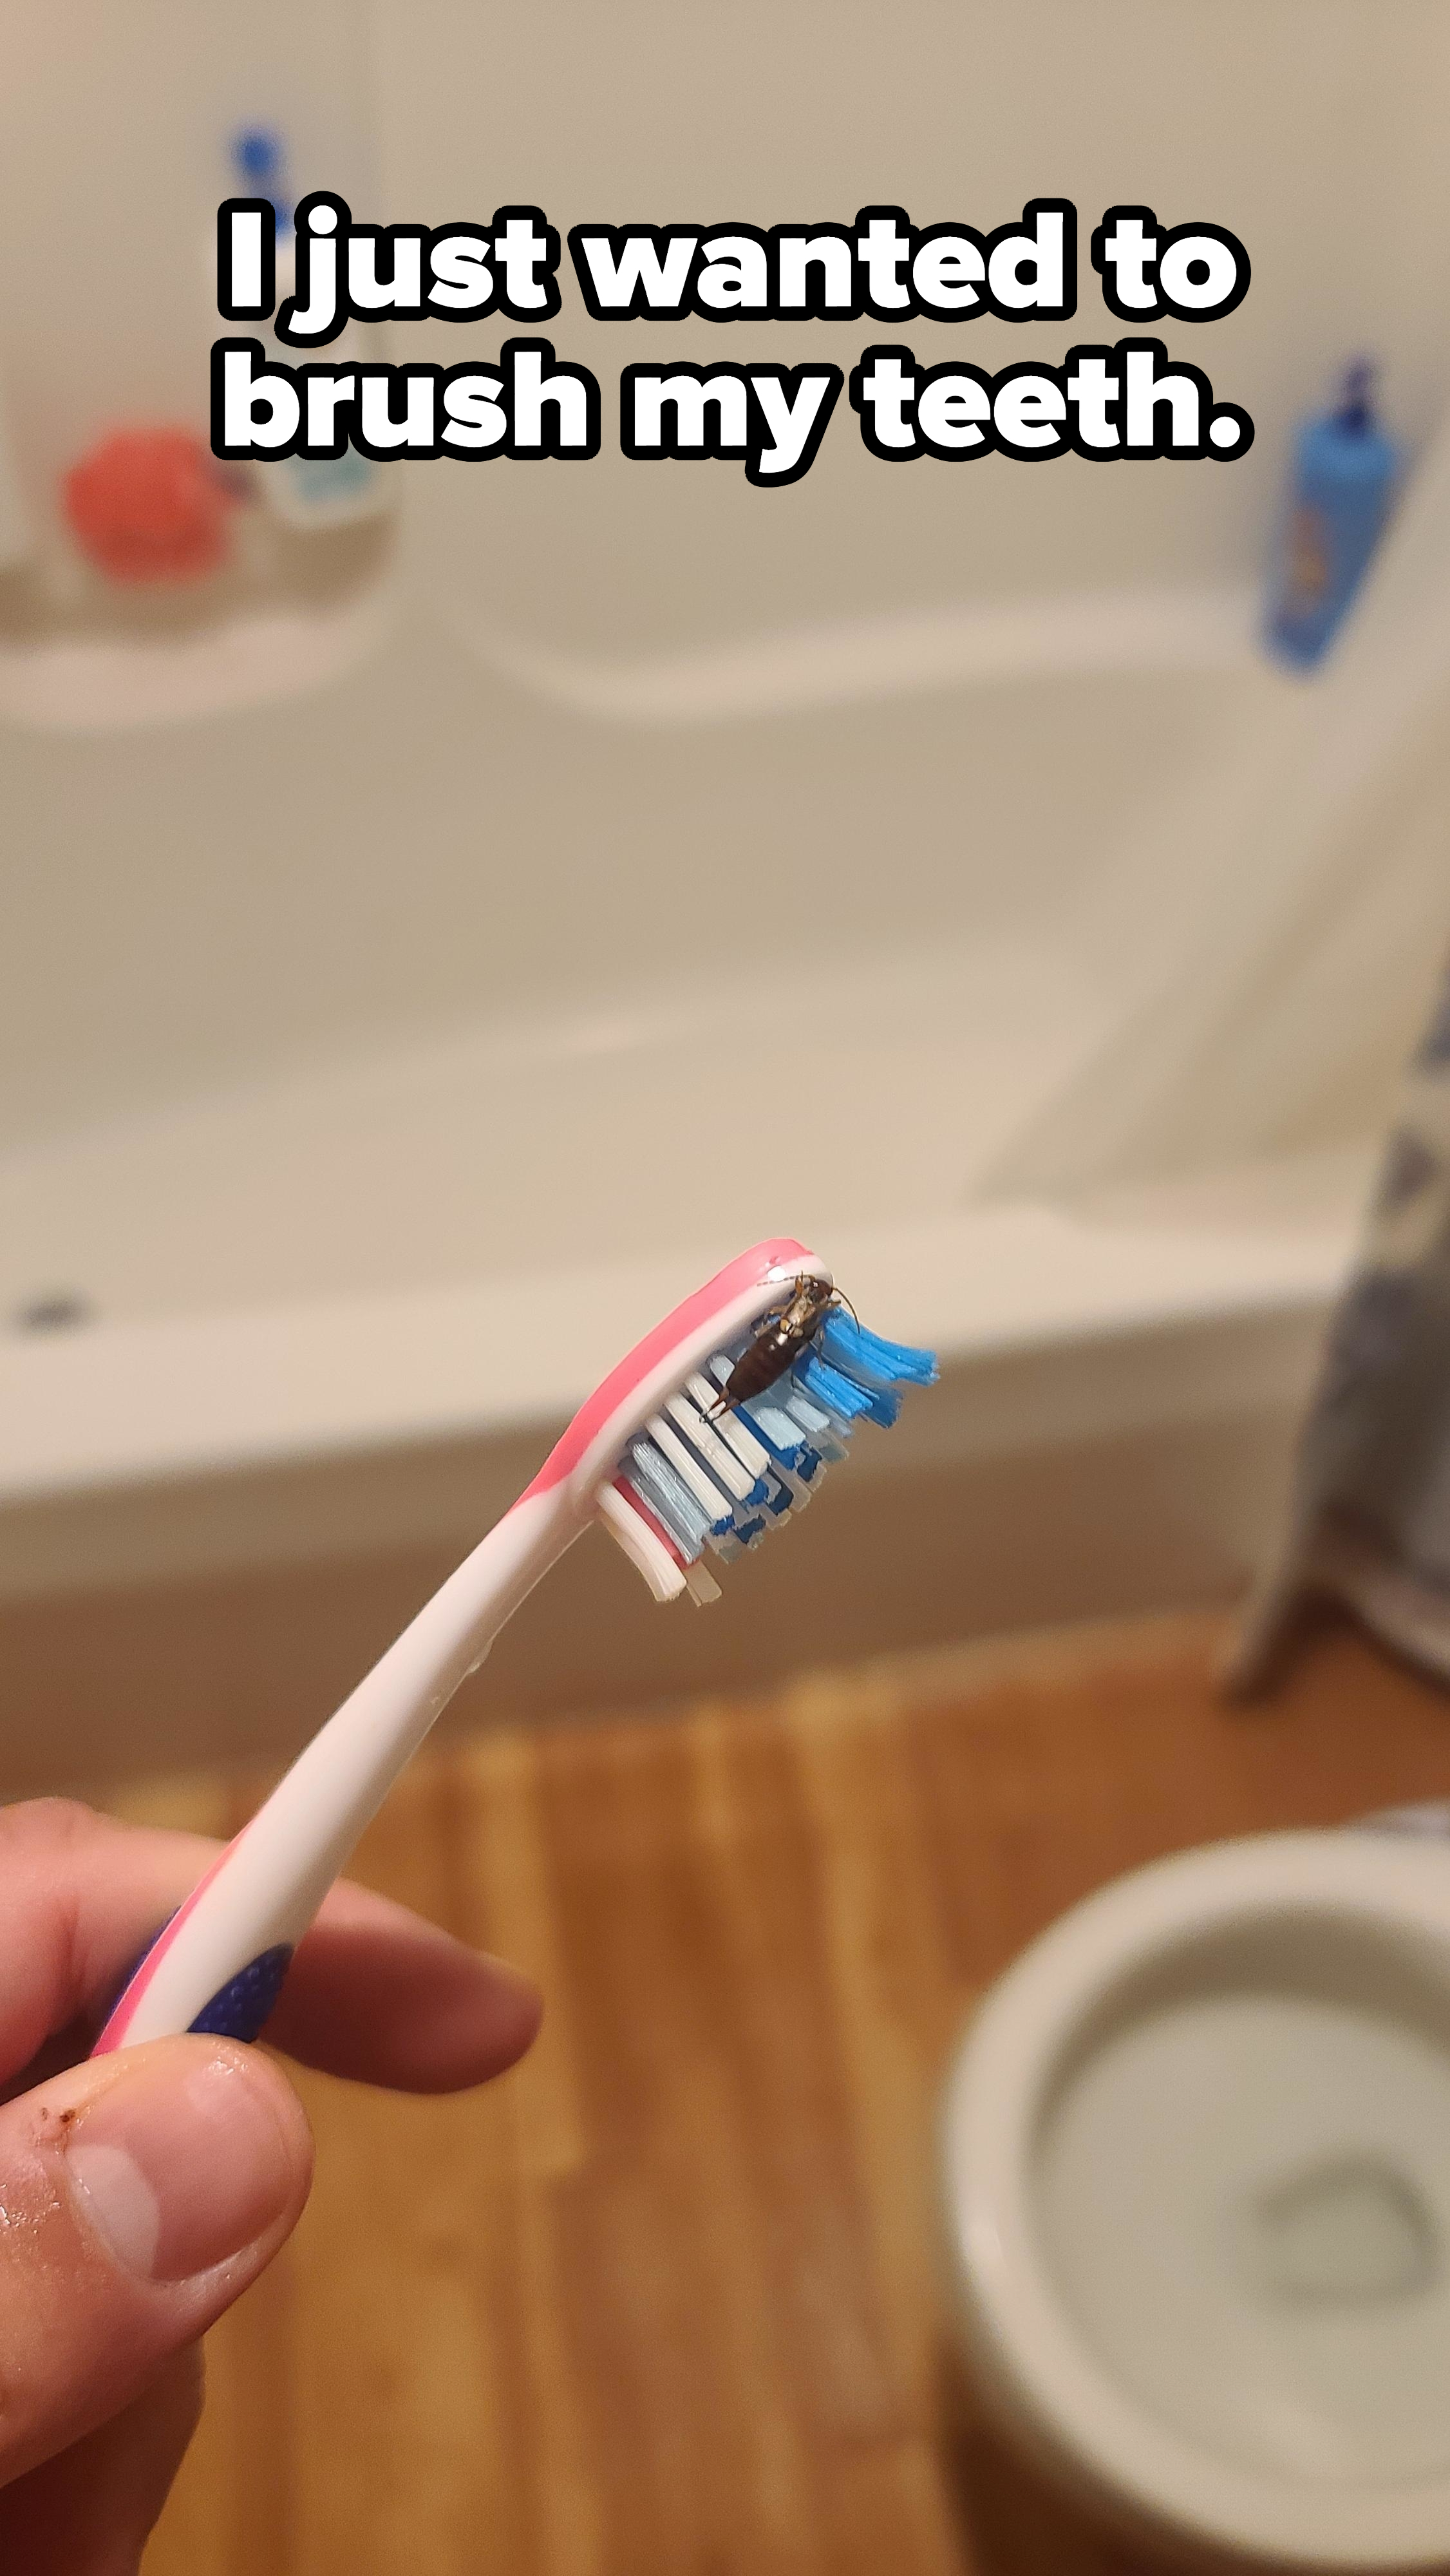 A bug on a toothbrush